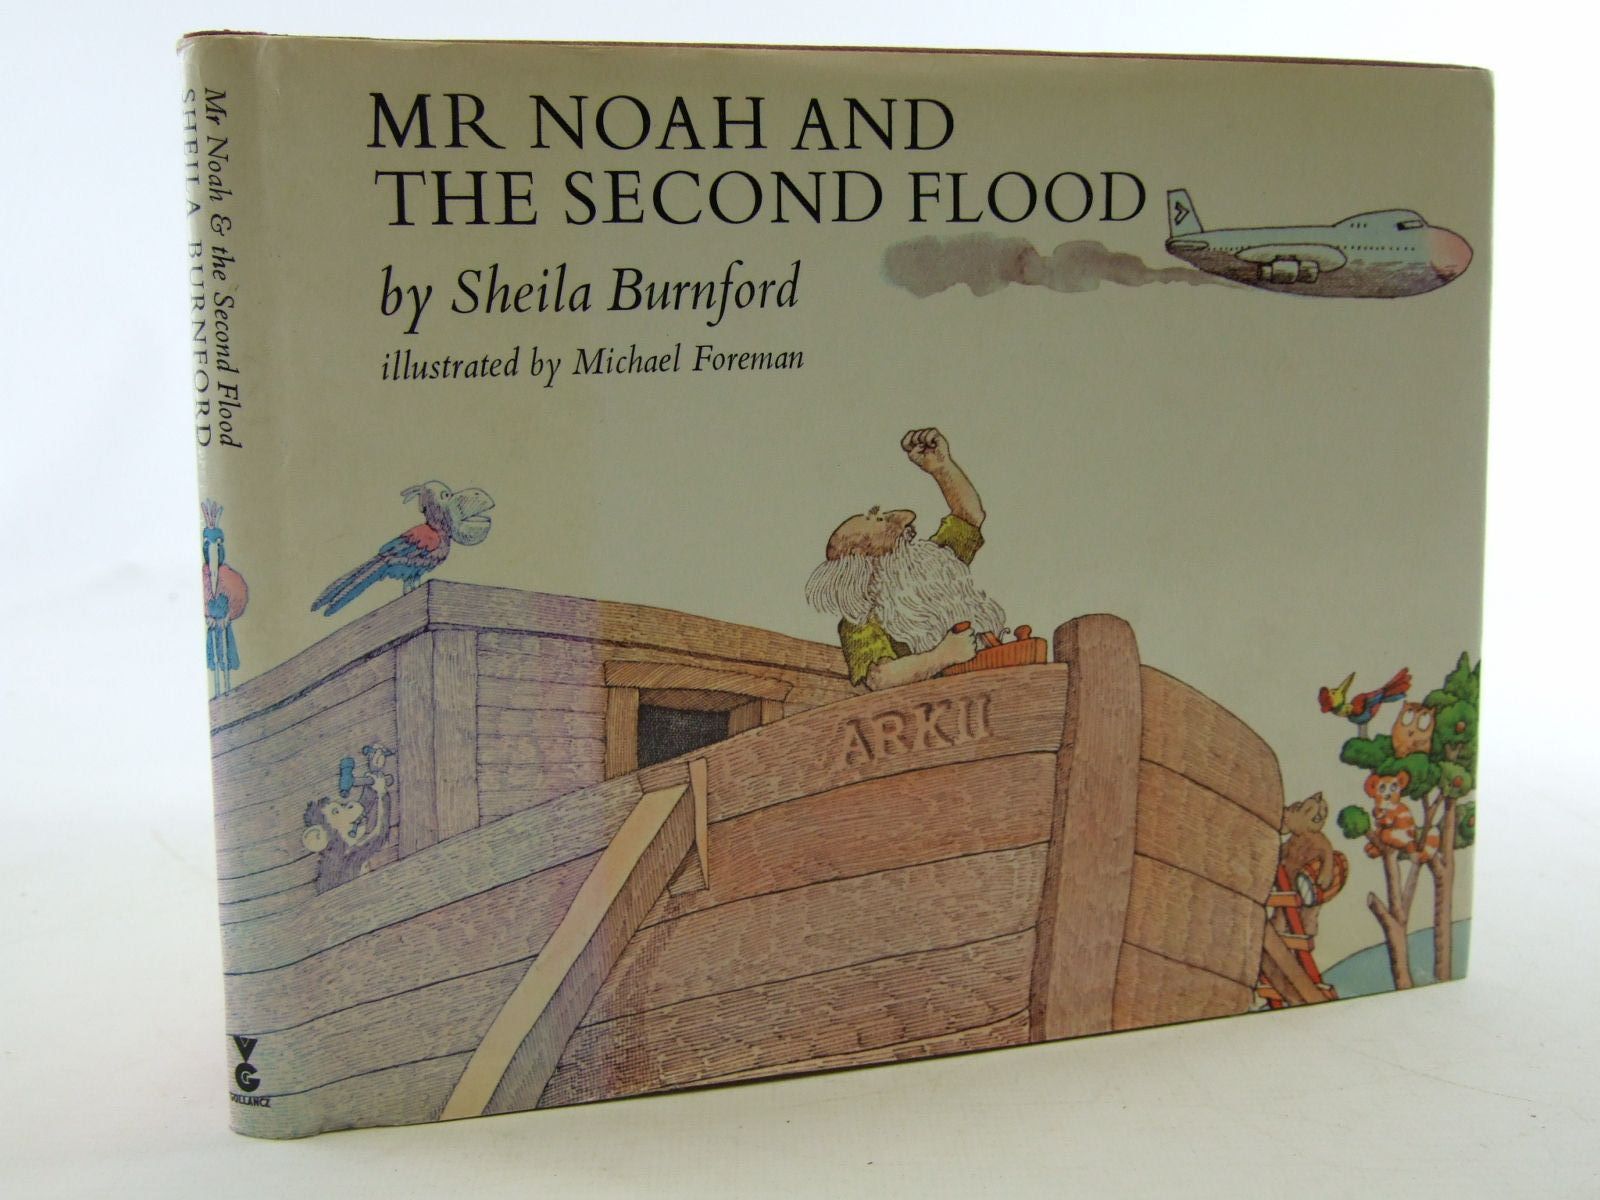 Photo of MR NOAH AND THE SECOND FLOOD written by Burnford, Sheila illustrated by Foreman, Michael published by Victor Gollancz Ltd. (STOCK CODE: 2108969)  for sale by Stella & Rose's Books